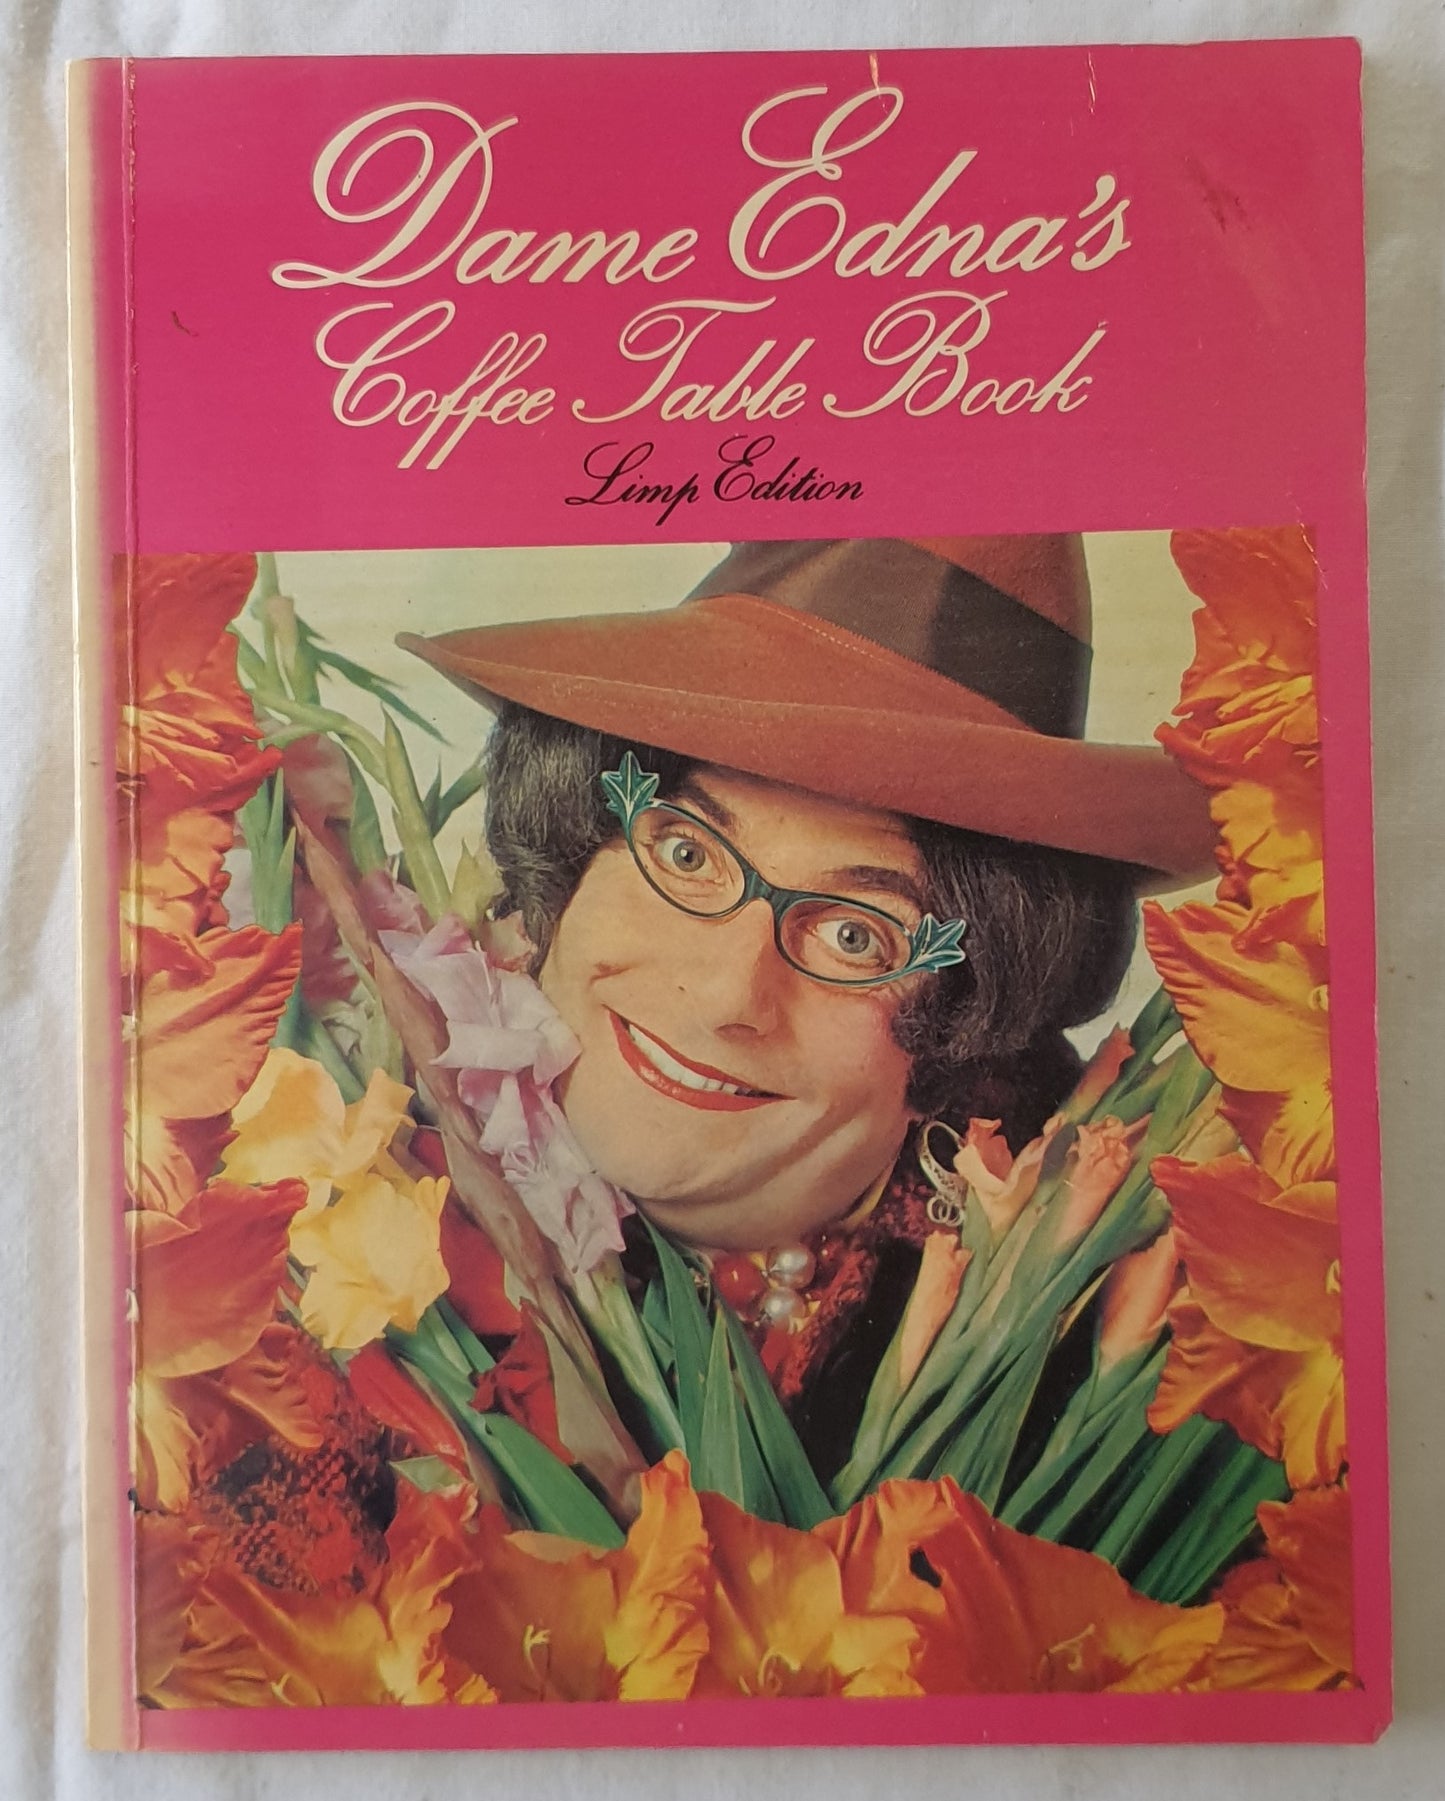 Dame Edna’s Coffee Table Book by Dame Edna Everage